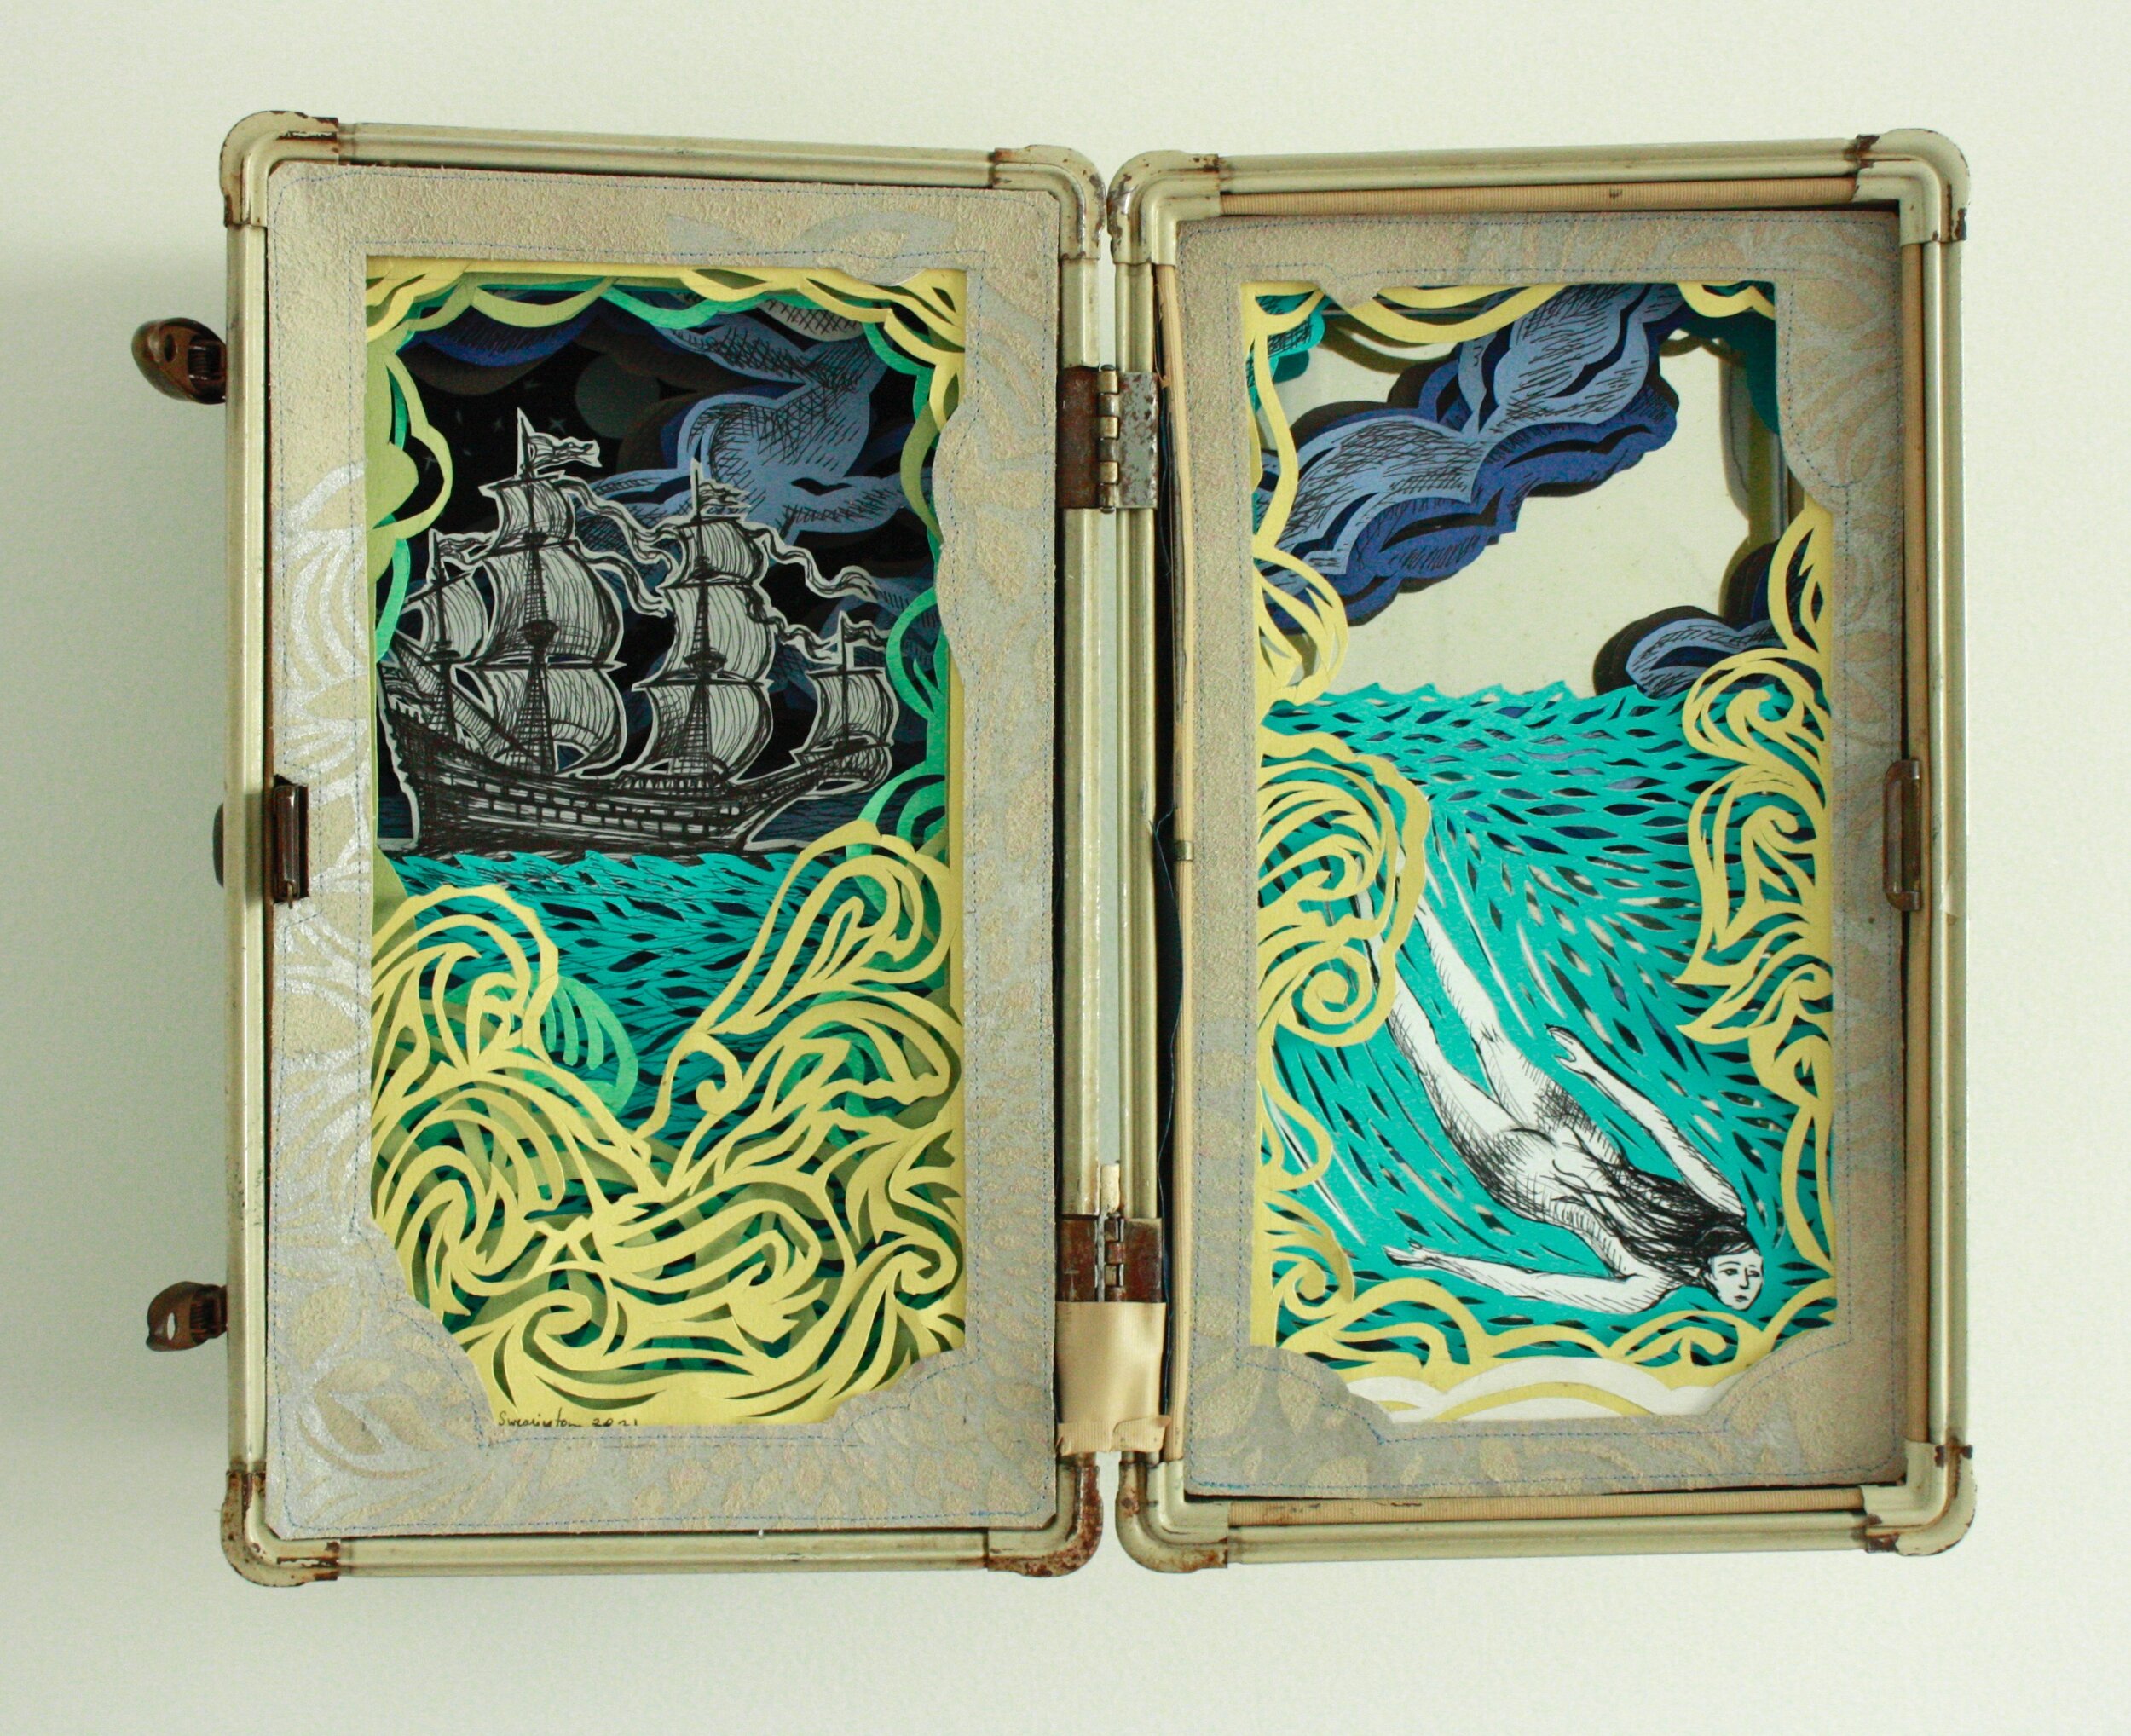  "Overboard," tunnel book in vintage suitcase, 14"h x 16"w x 6"d, 2021